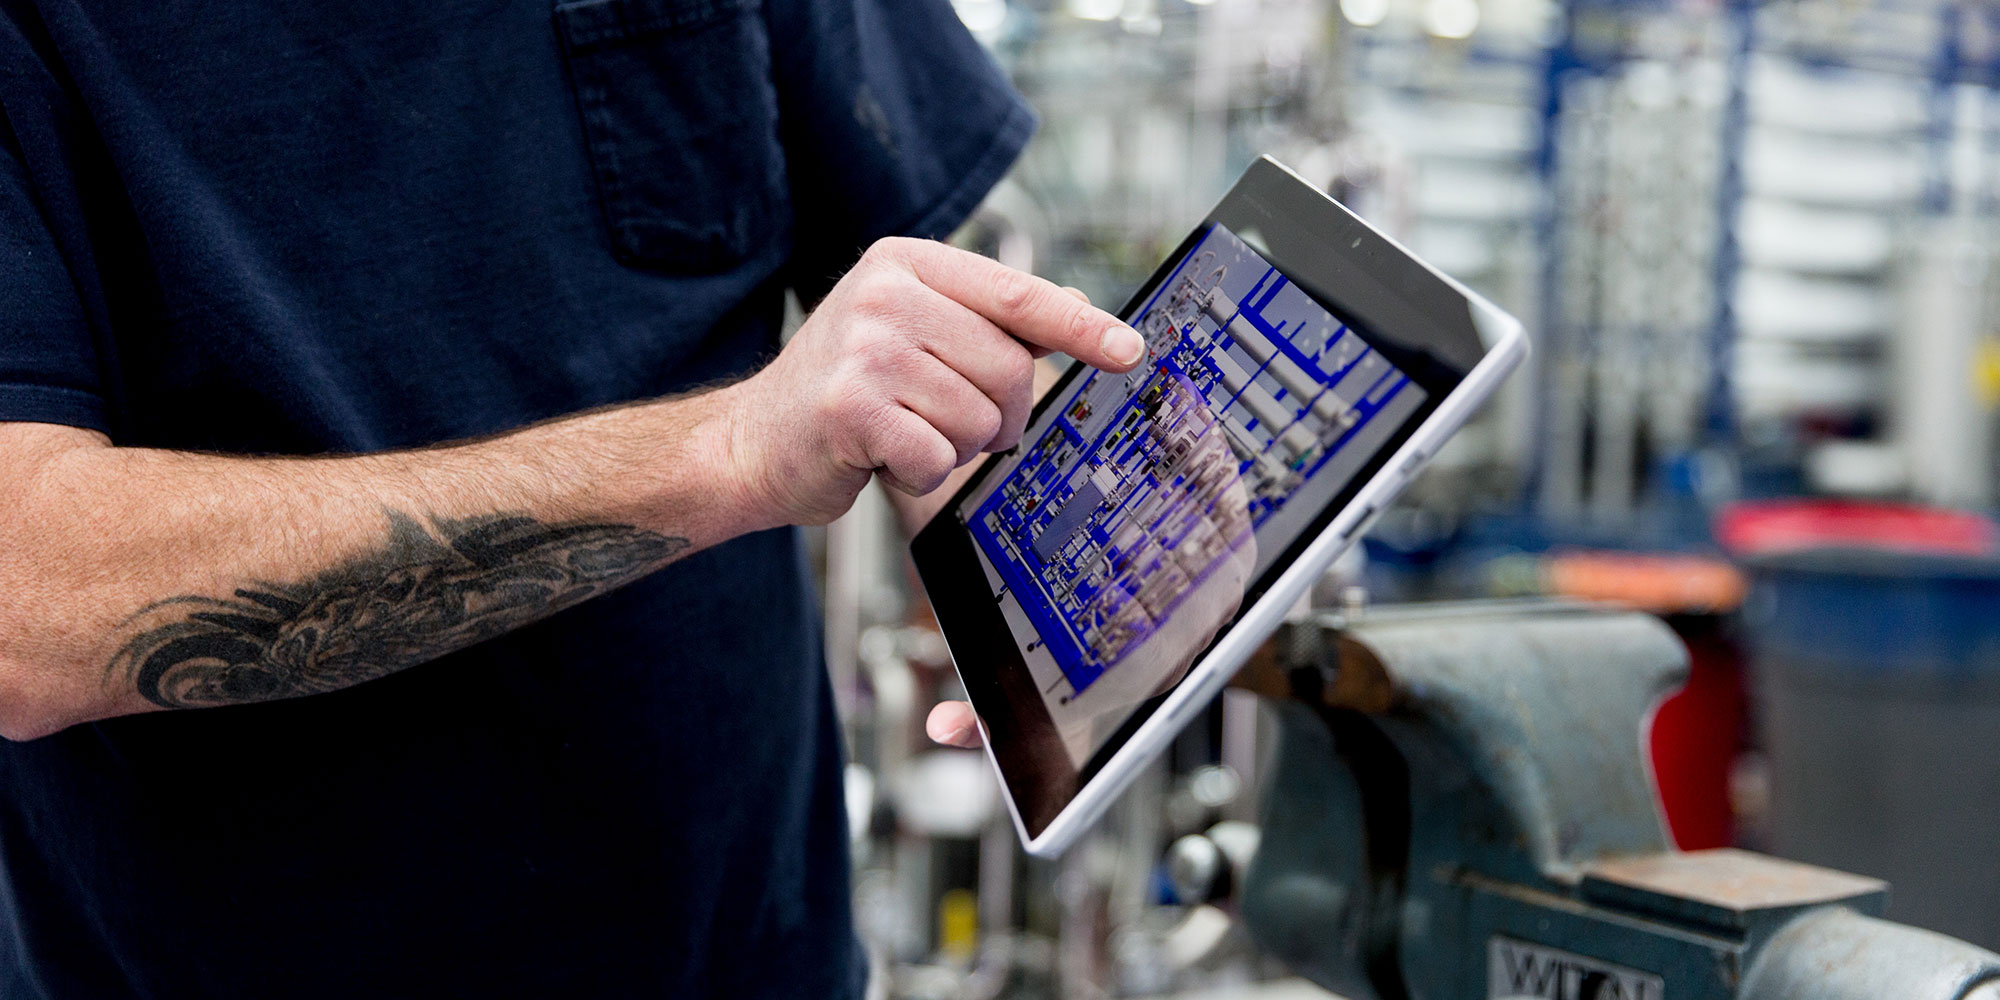 Man with a tattoo pointing at a tablet in a factory